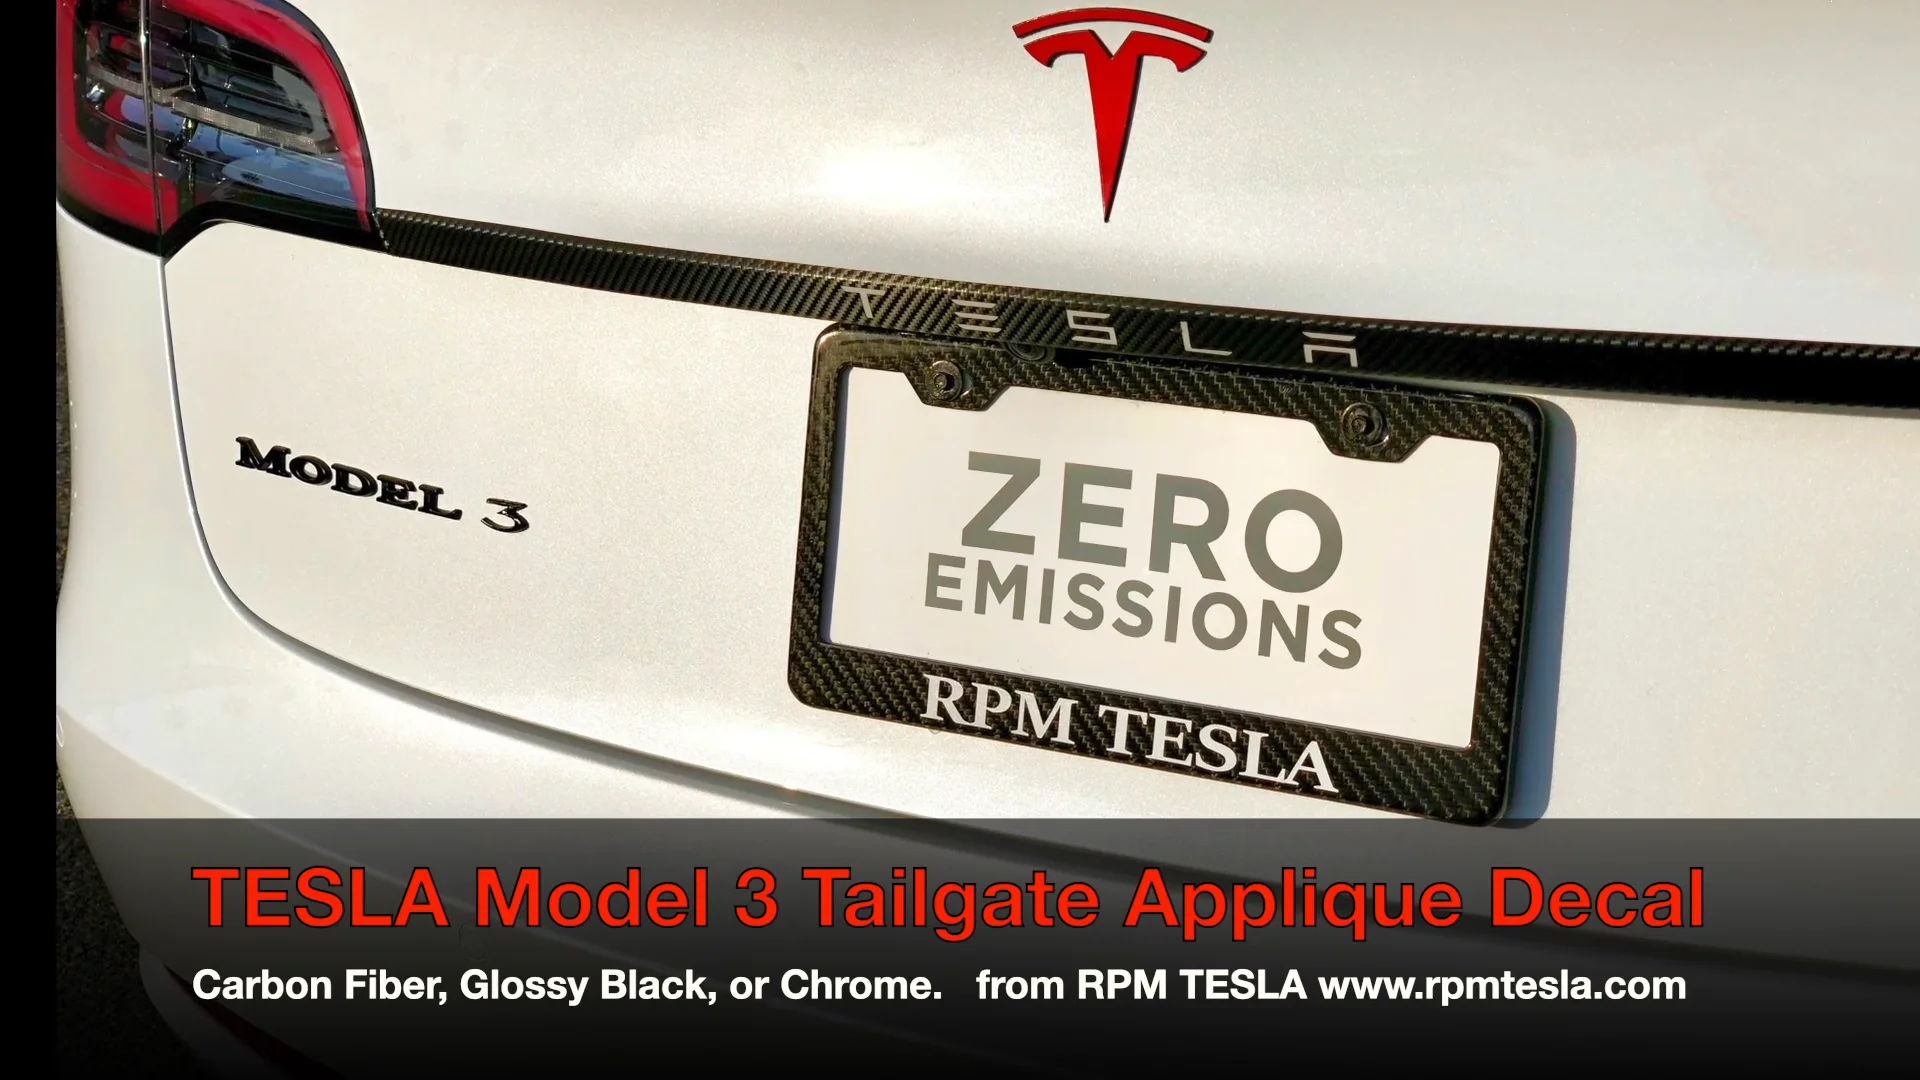 T-E-S-L-A Tailgate Emblems for Model 3 & Y on Vimeo